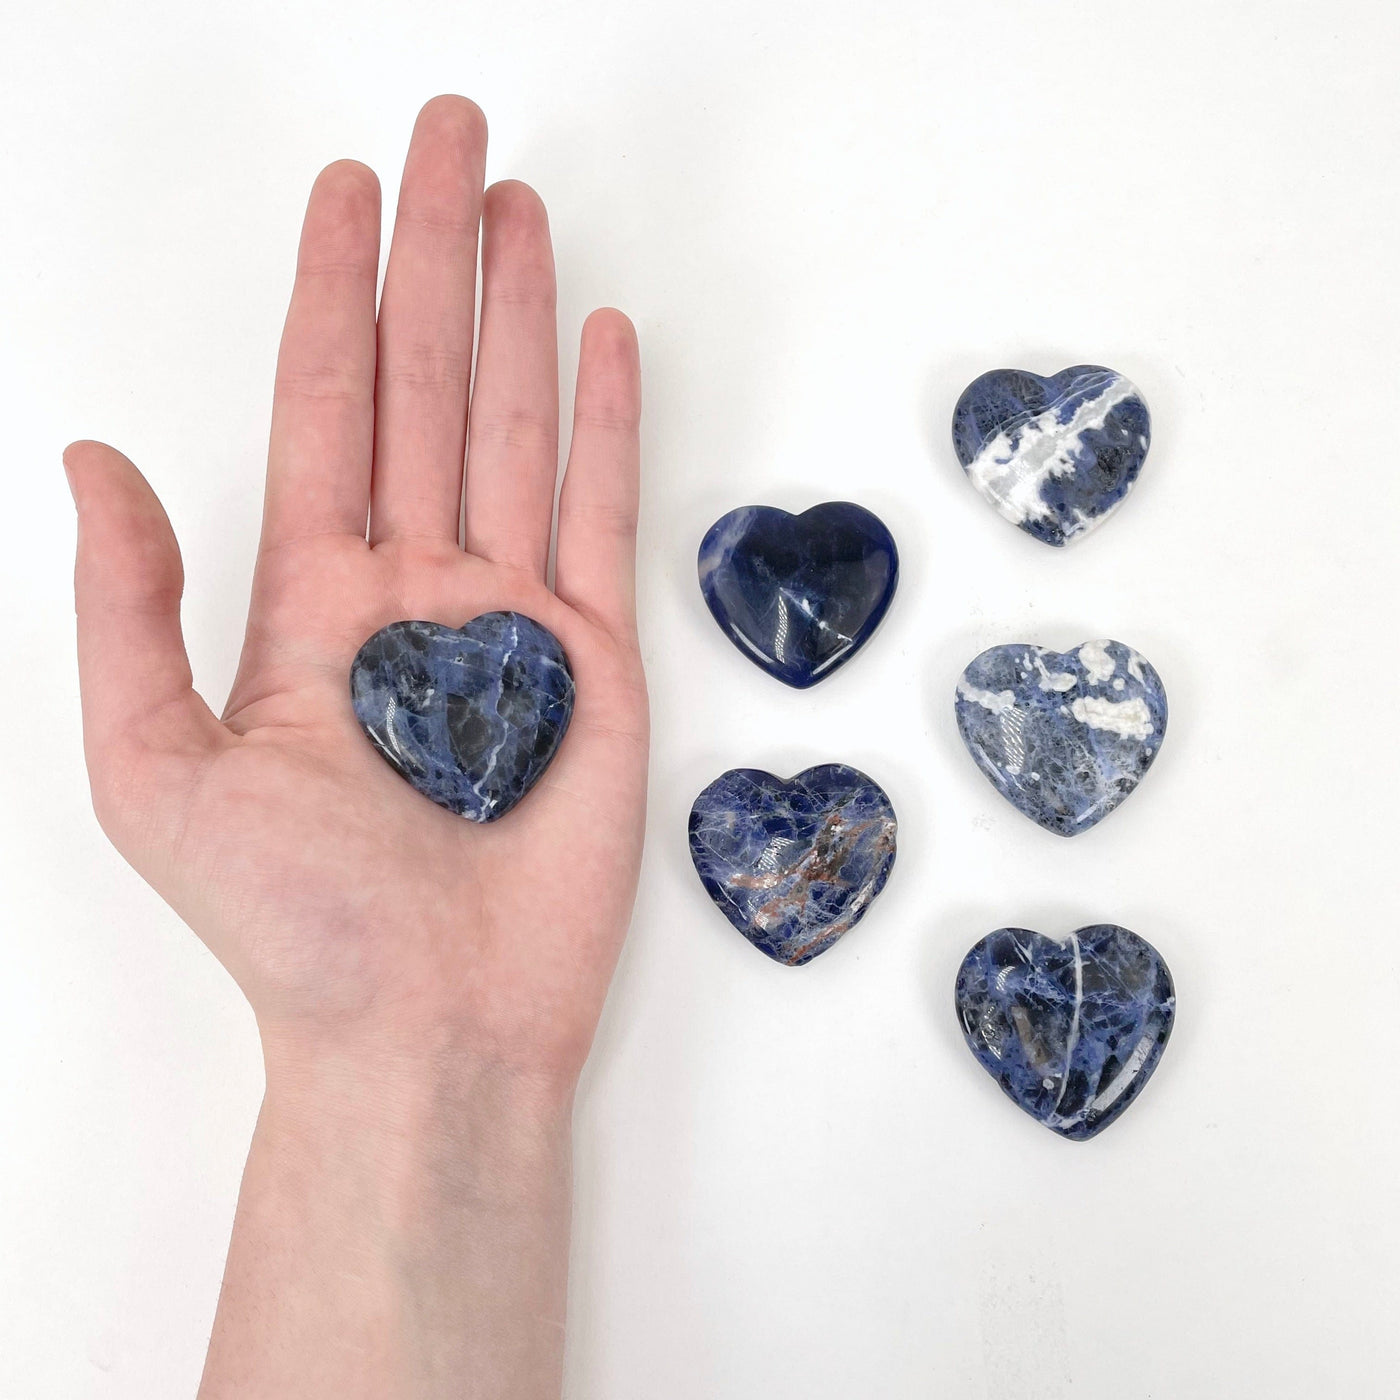 one sodalite polished heart in hand for size reference